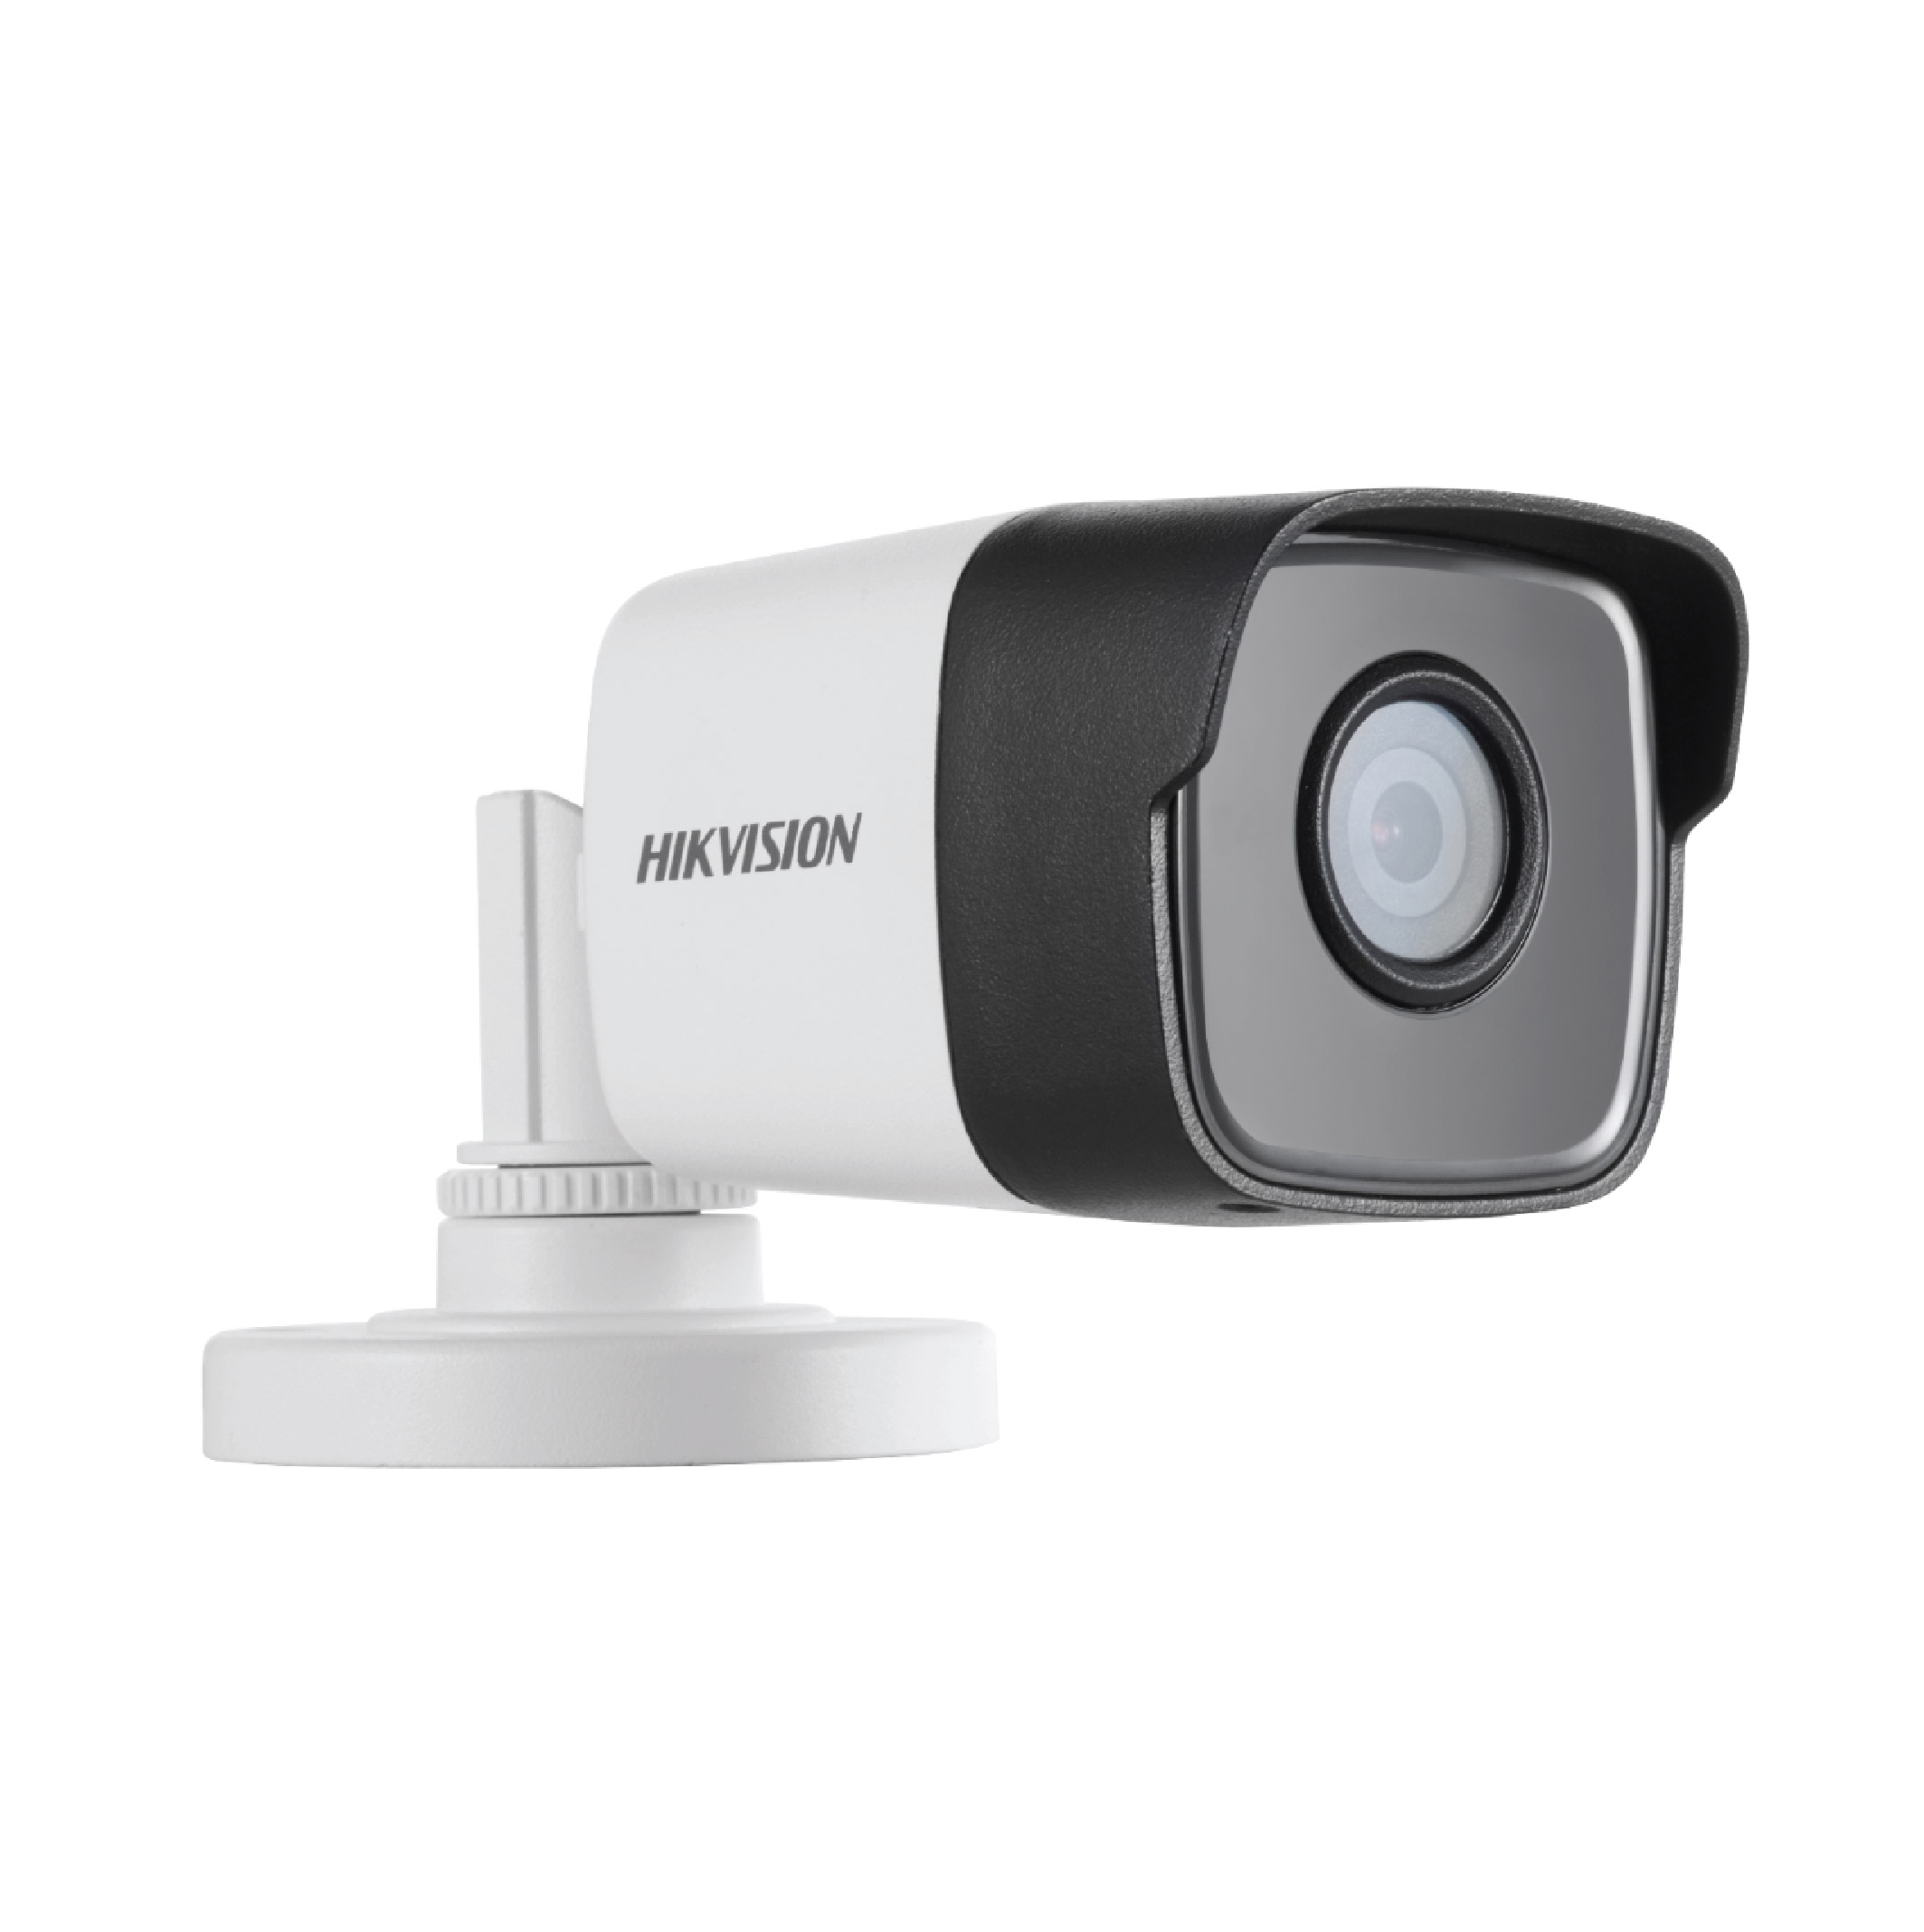 HIKVISION DS-2CE16D8T-ITPF Turbo HD Camera